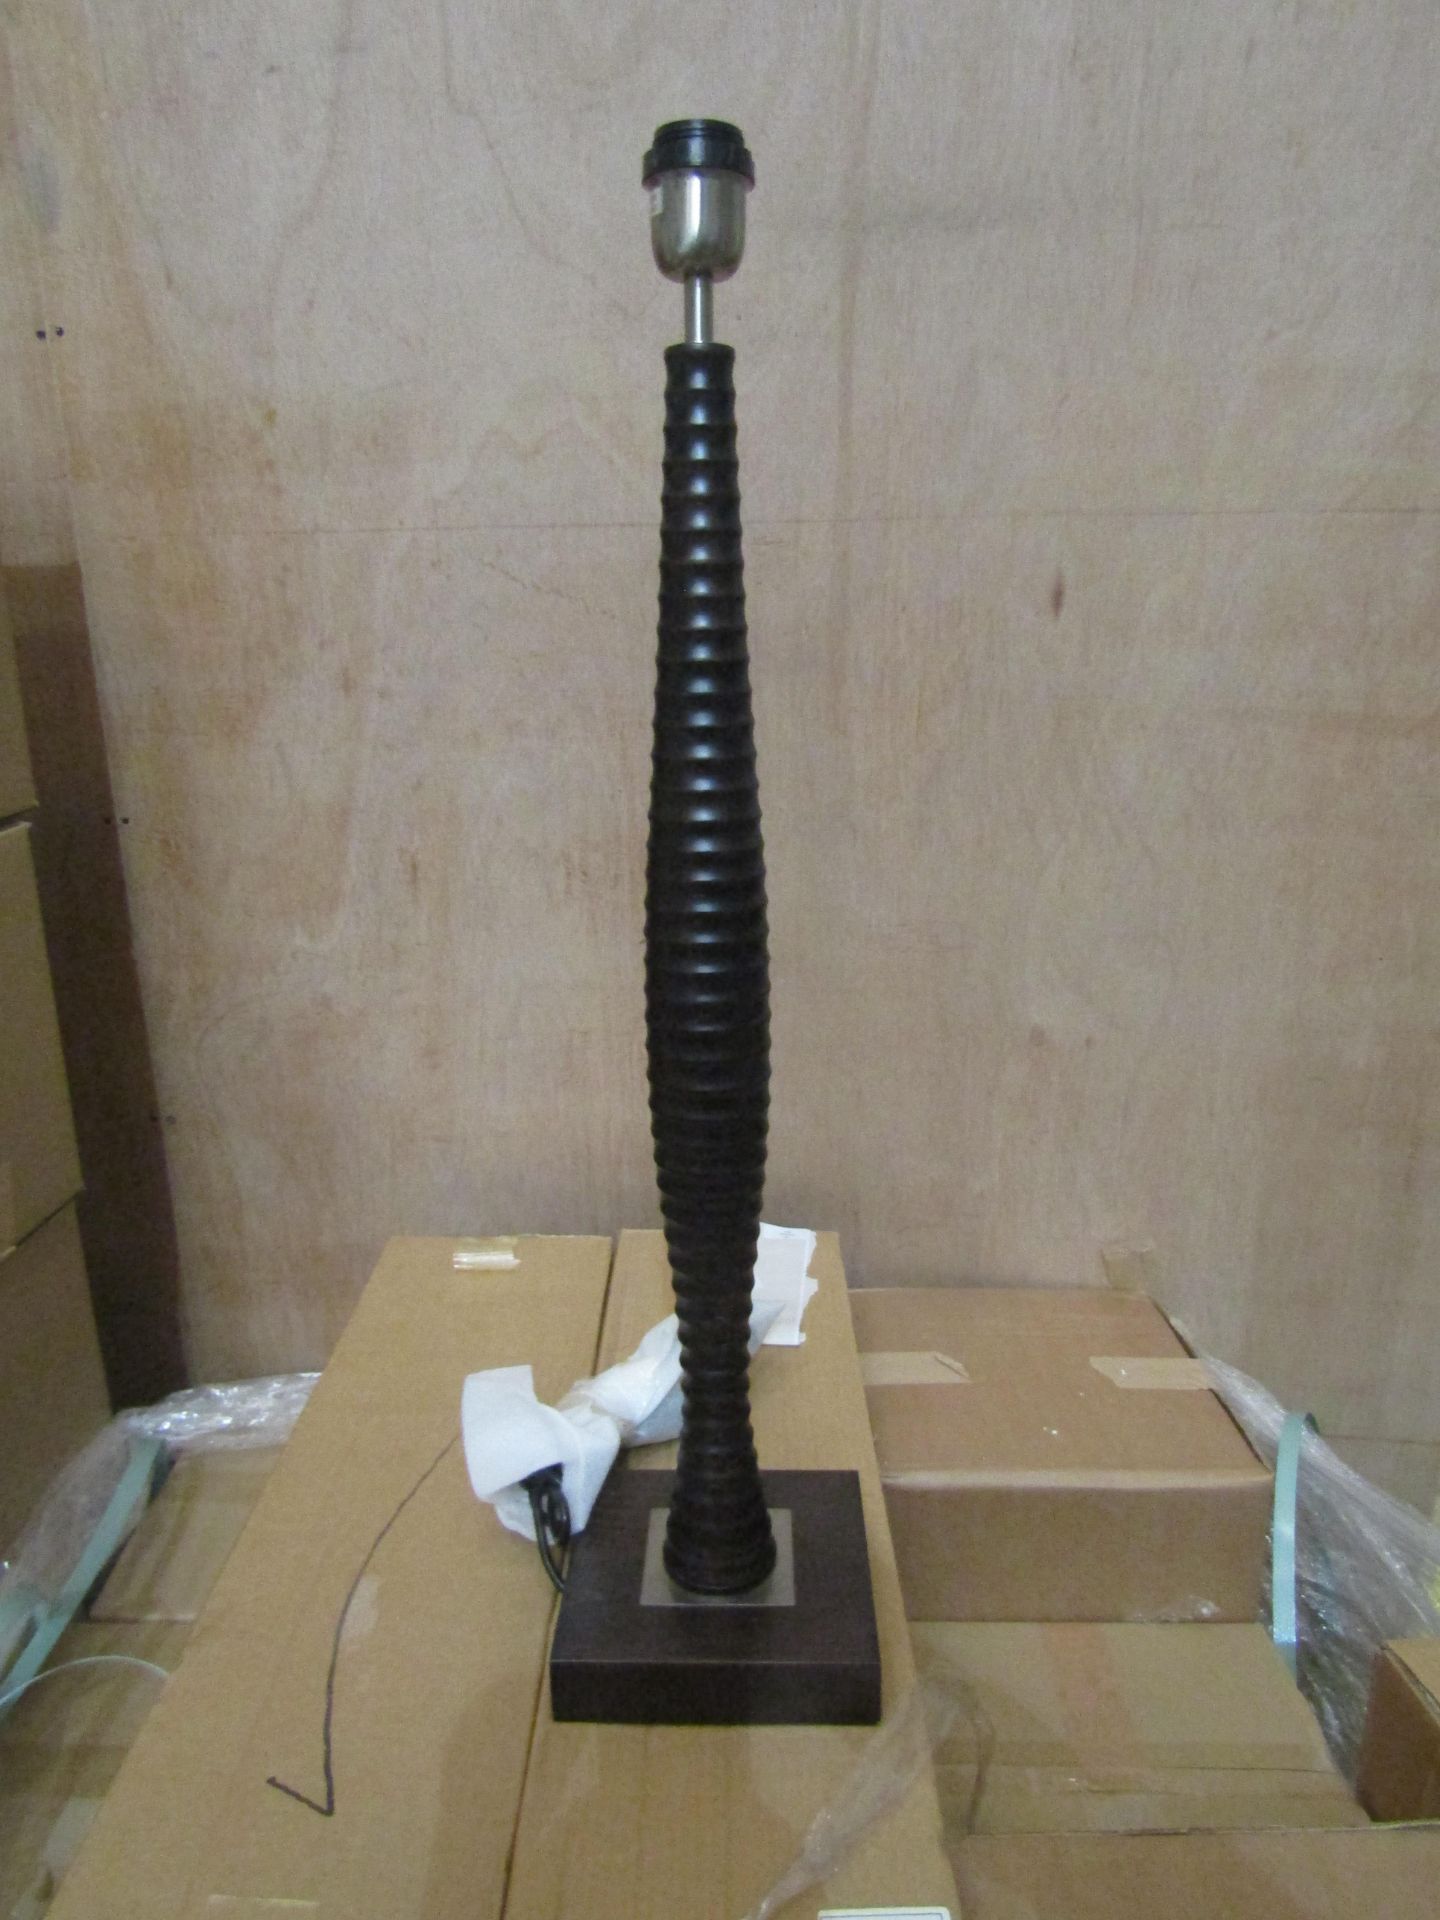 Chelsom Large Dark Wood Ribbed Table Lamp - New & Boxed.